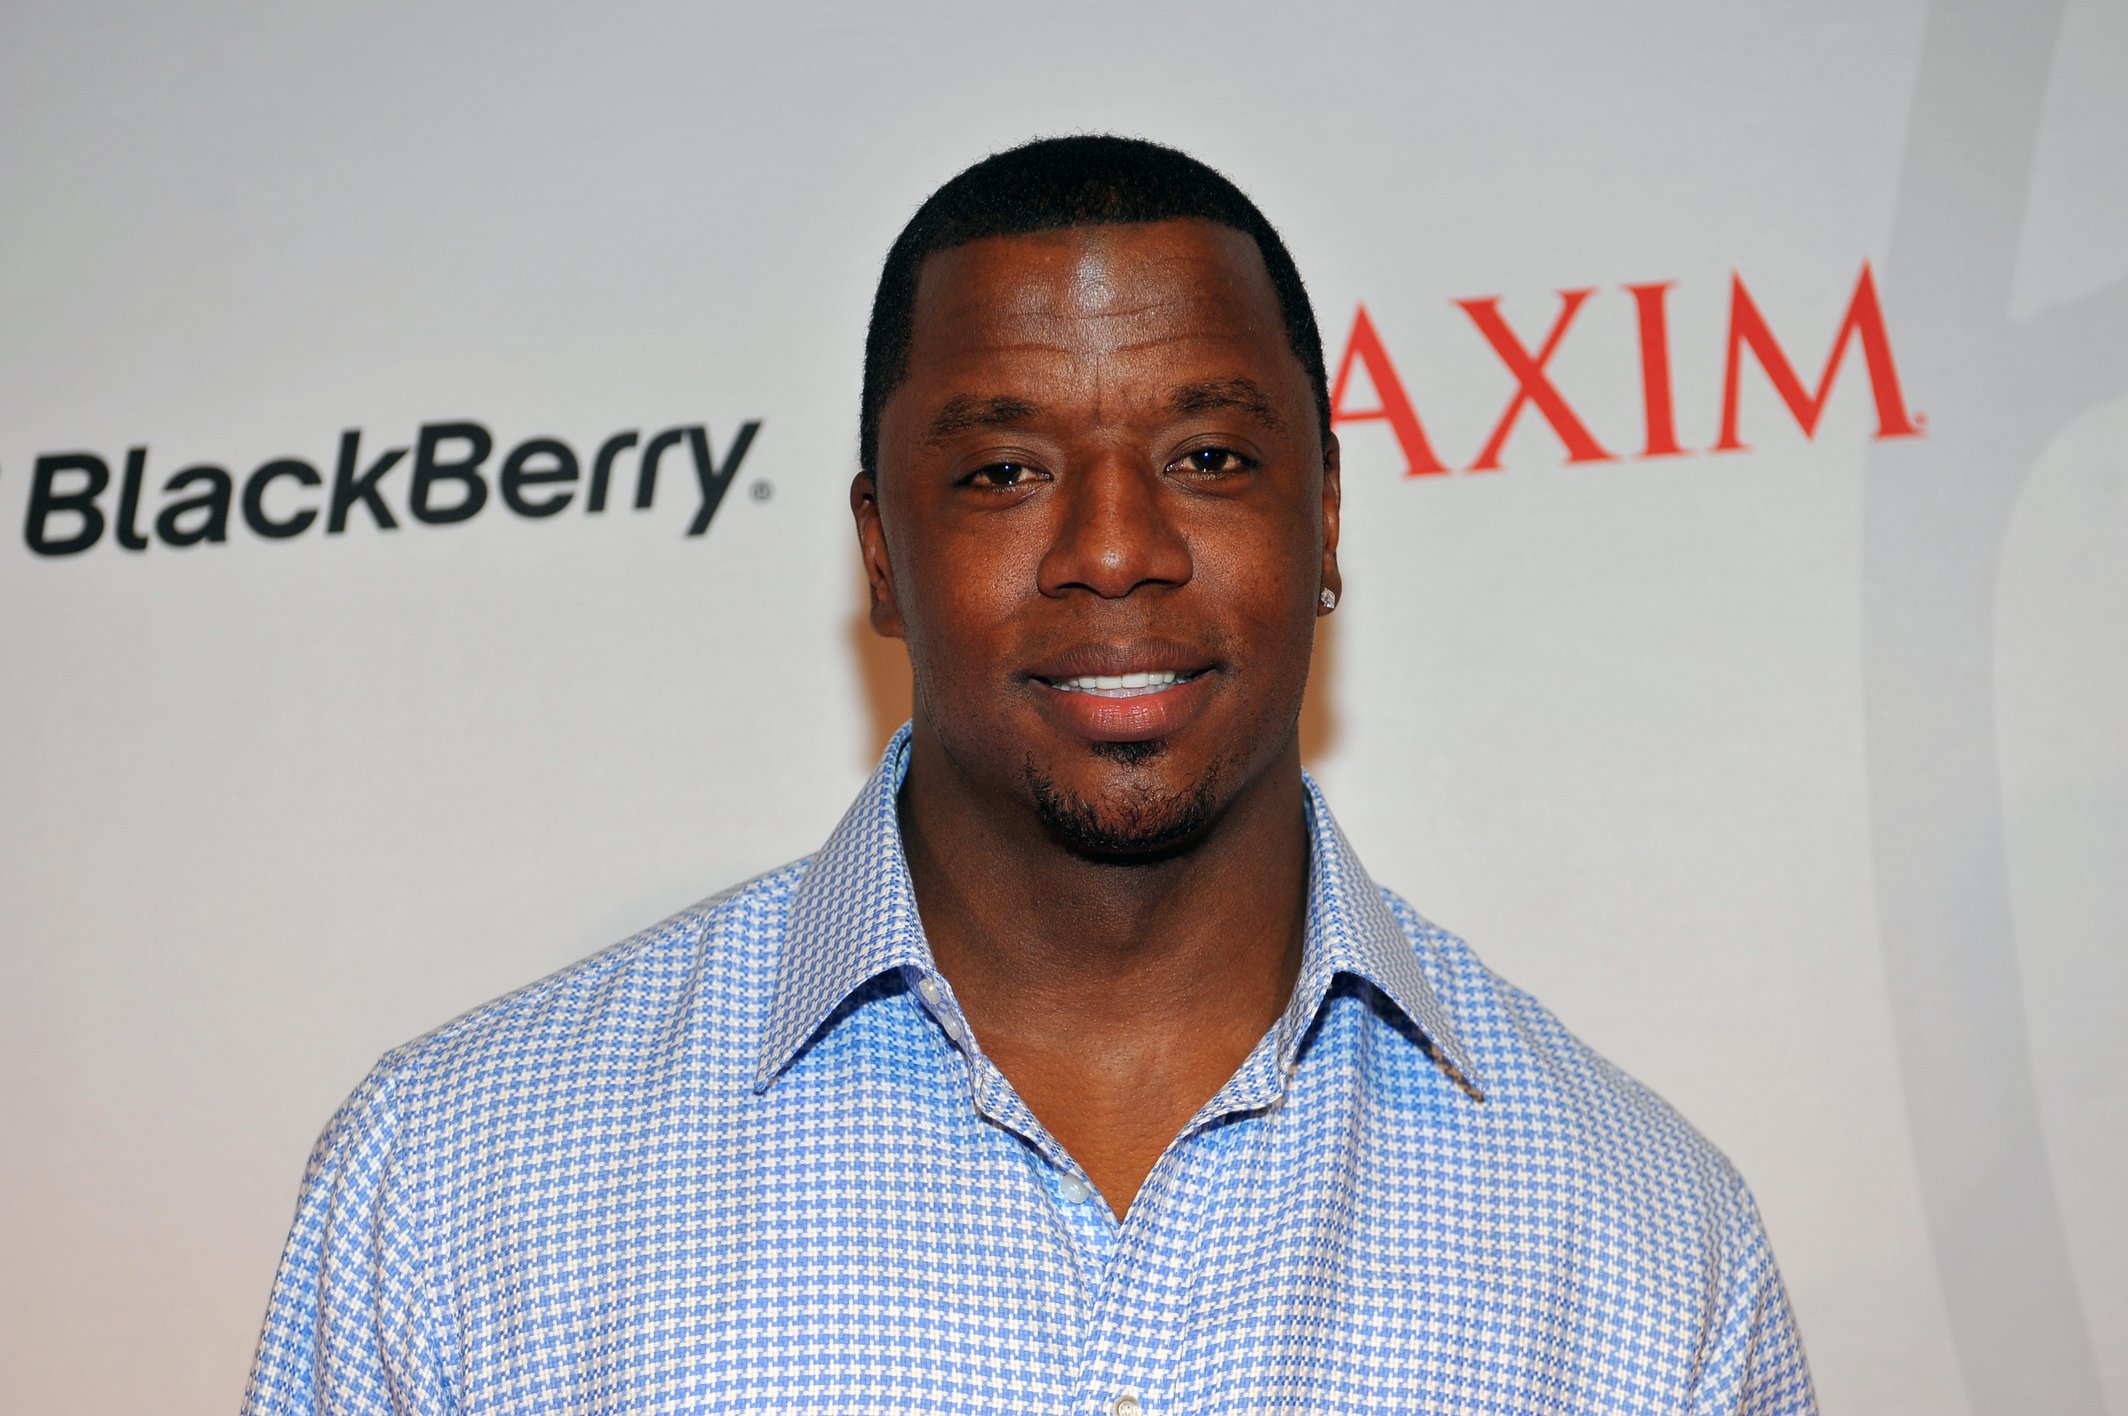 Kordell Stewart attends the Maxim Blackberry Madness Event on April 6, 2013 in Atlanta, Georgia | Photo by Moses Robinson/WireImage/GettyImages